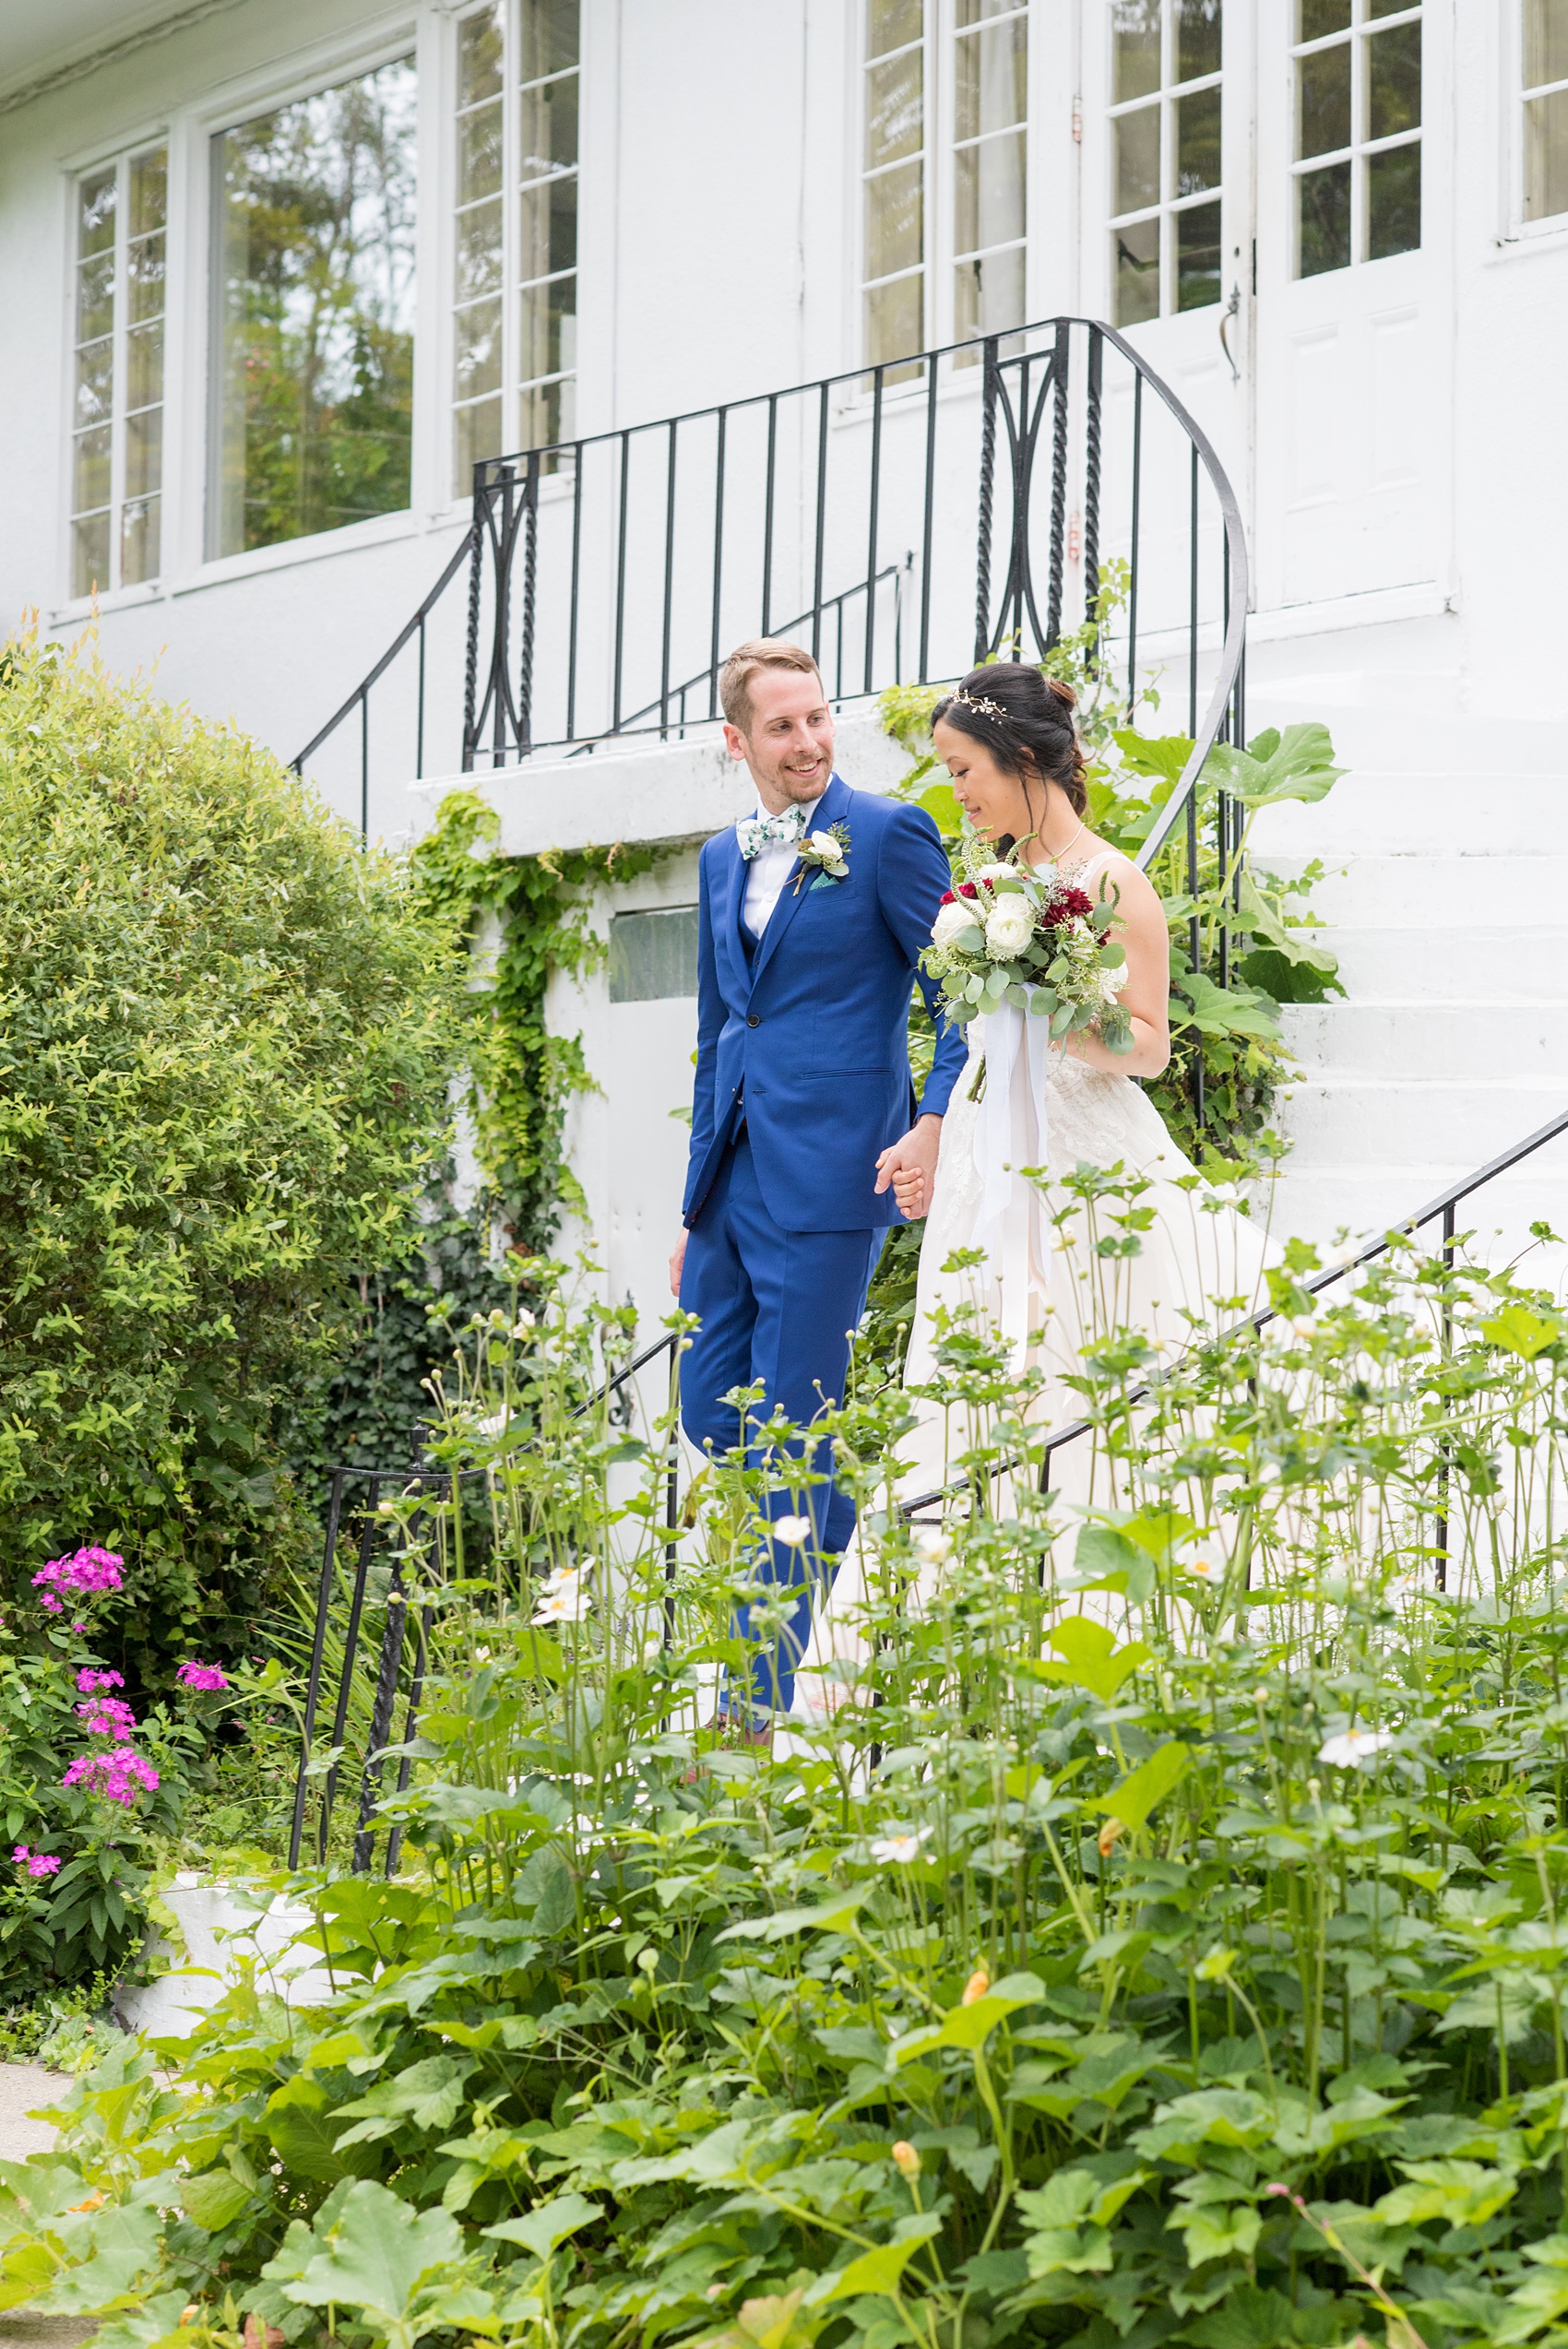 Wedding photos at Crabtree's Kittle House in Chappaqua, New York by Mikkel Paige Photography. This venue in Westchester county has the perfect elegance of a historic home and garden very close to NYC. The bride wore a gown from BHLDN and groom a custom blue Indochino suit. Click through for more summer wedding inspiration from their day! #bluesuit #BHLDNgown #mikkelpaige #CrabtreesKittleHouse #WestchesterWeddingVenues #WestchesterWedding #AsianBride #summerwedding #brideandgroom